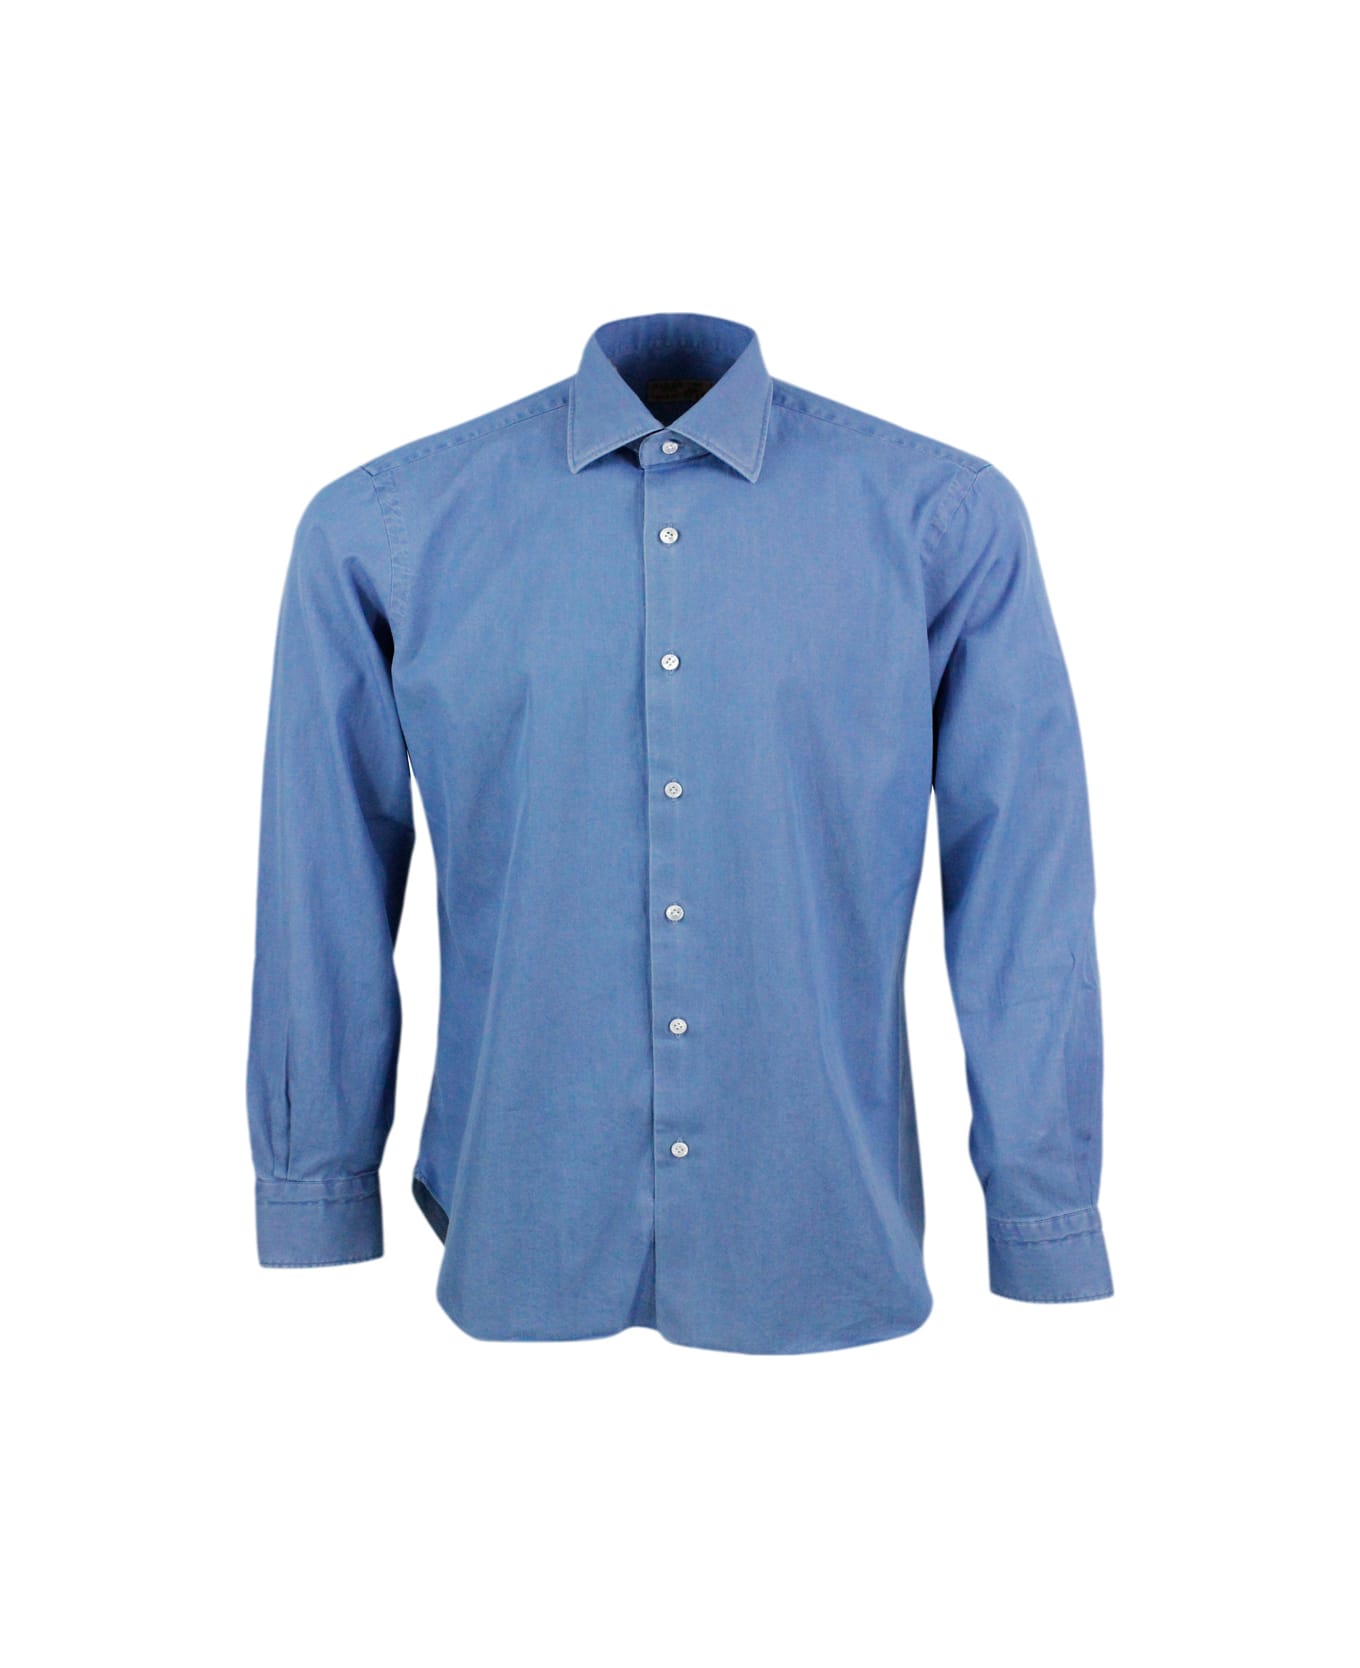 Barba Napoli Dandylife Shirt In Light Denim With Hand-stitched Italian Collar And Mother-of-pearl Buttons - Denim